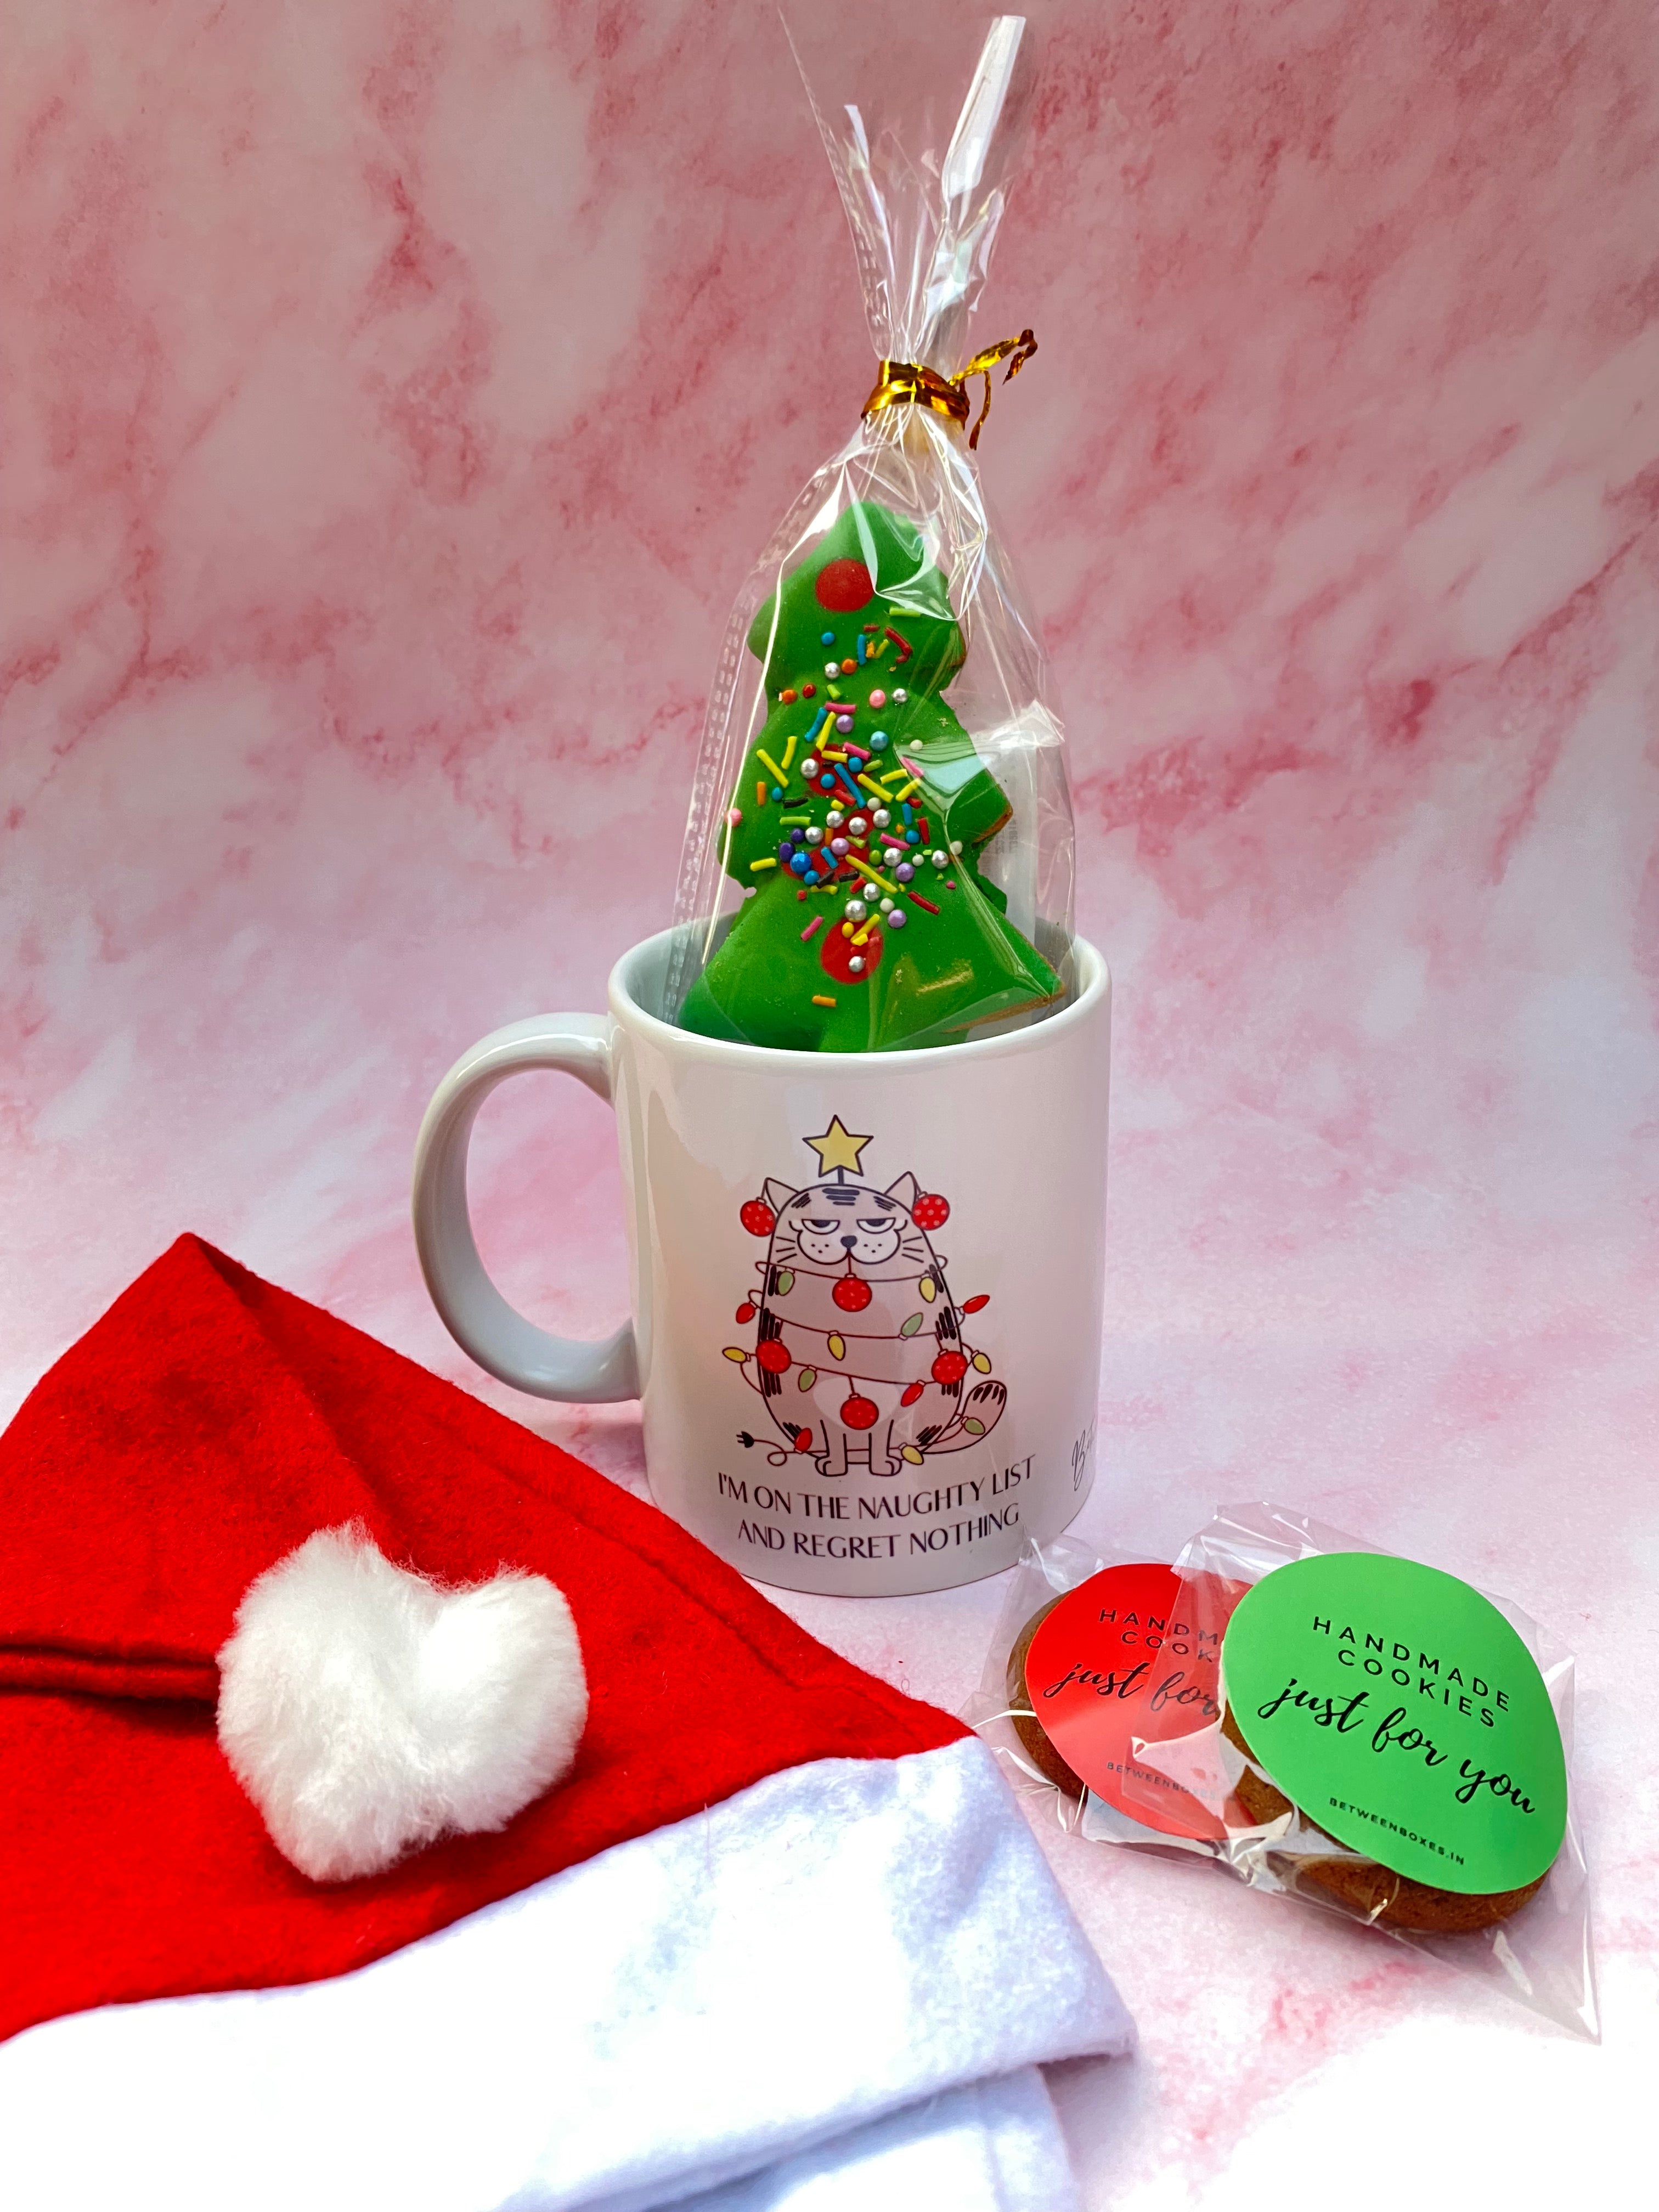 10 Best Secret Santa Gifts Under 1000 INR For Your Colleagues | LBB